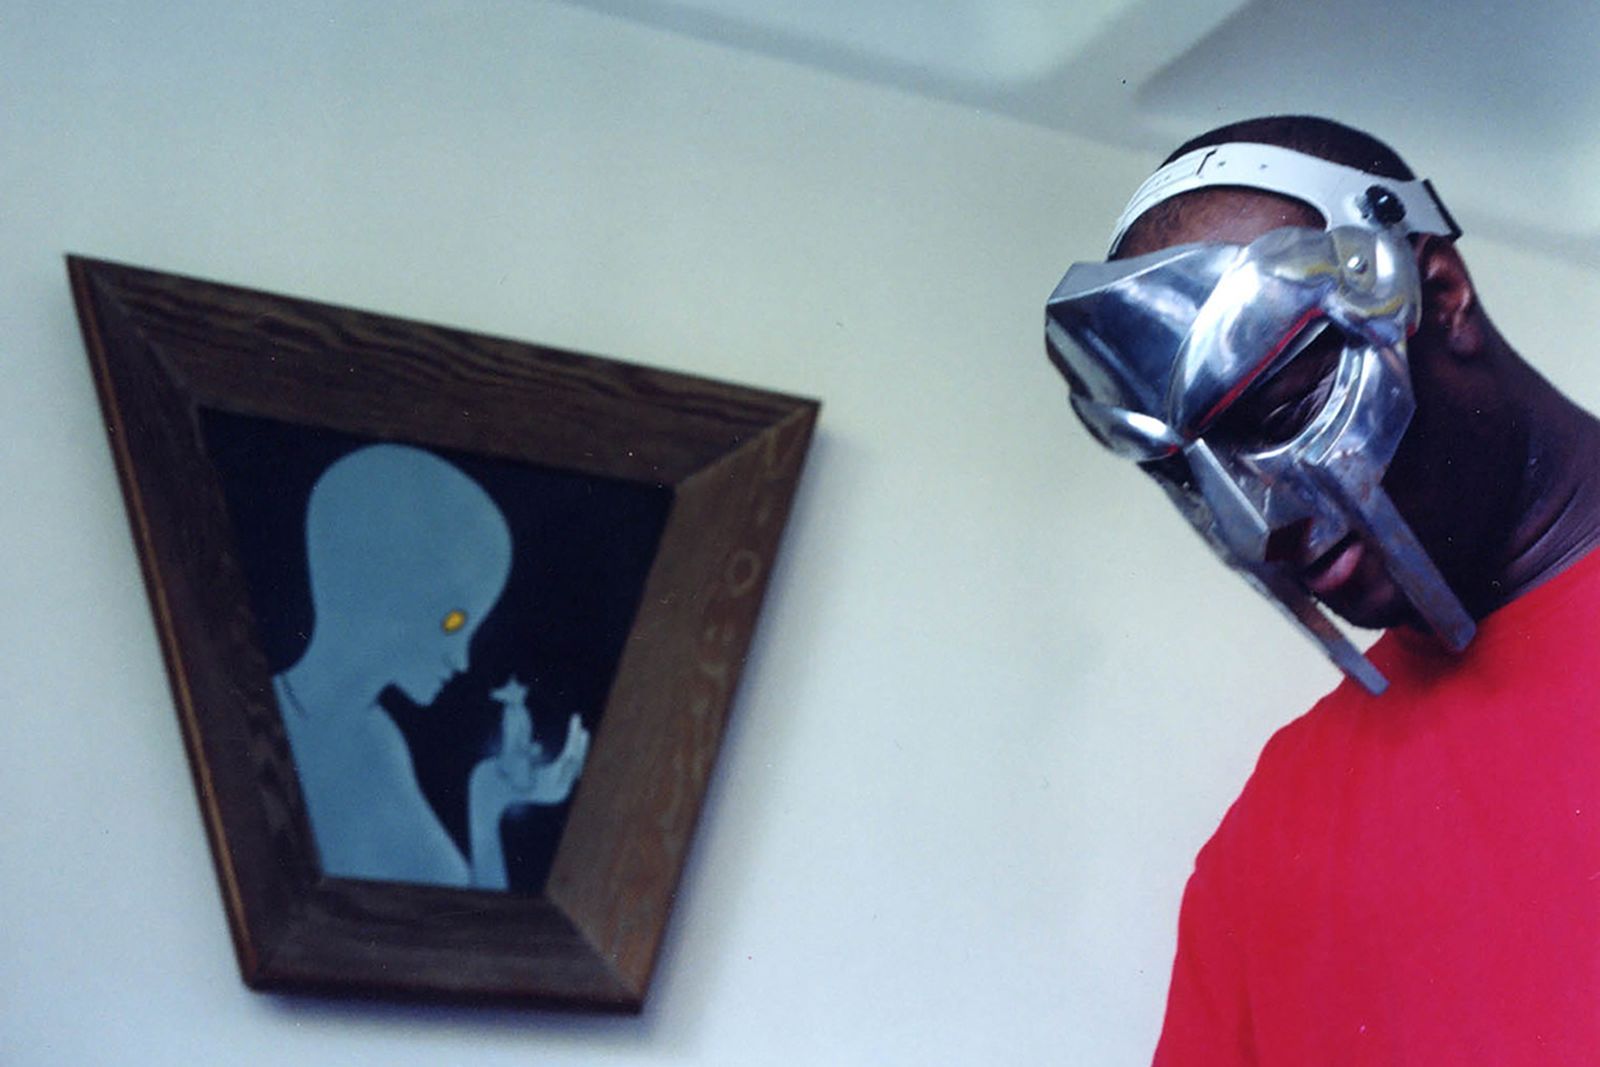 saving-face-a-timeline-of-masked-musicians-who-pioneered-face-covering-05